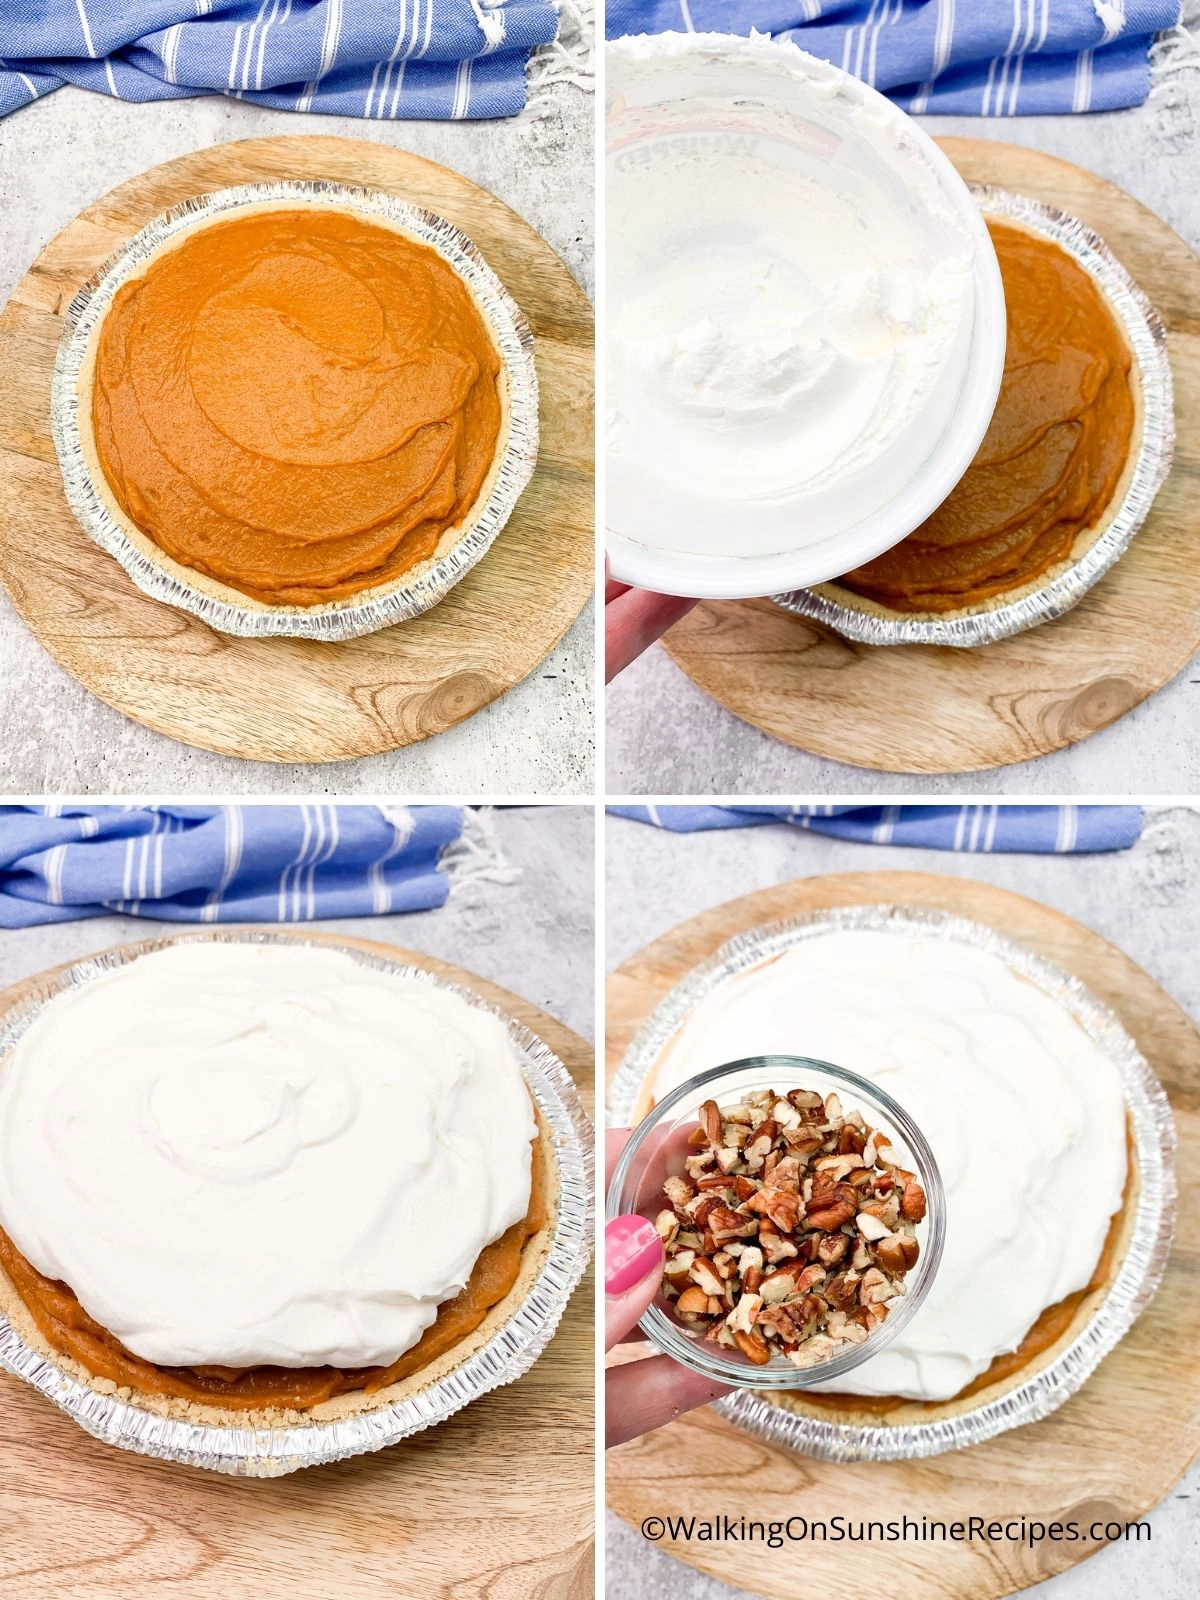 Add Cool Whip topping to the top of pumpkin mixture.